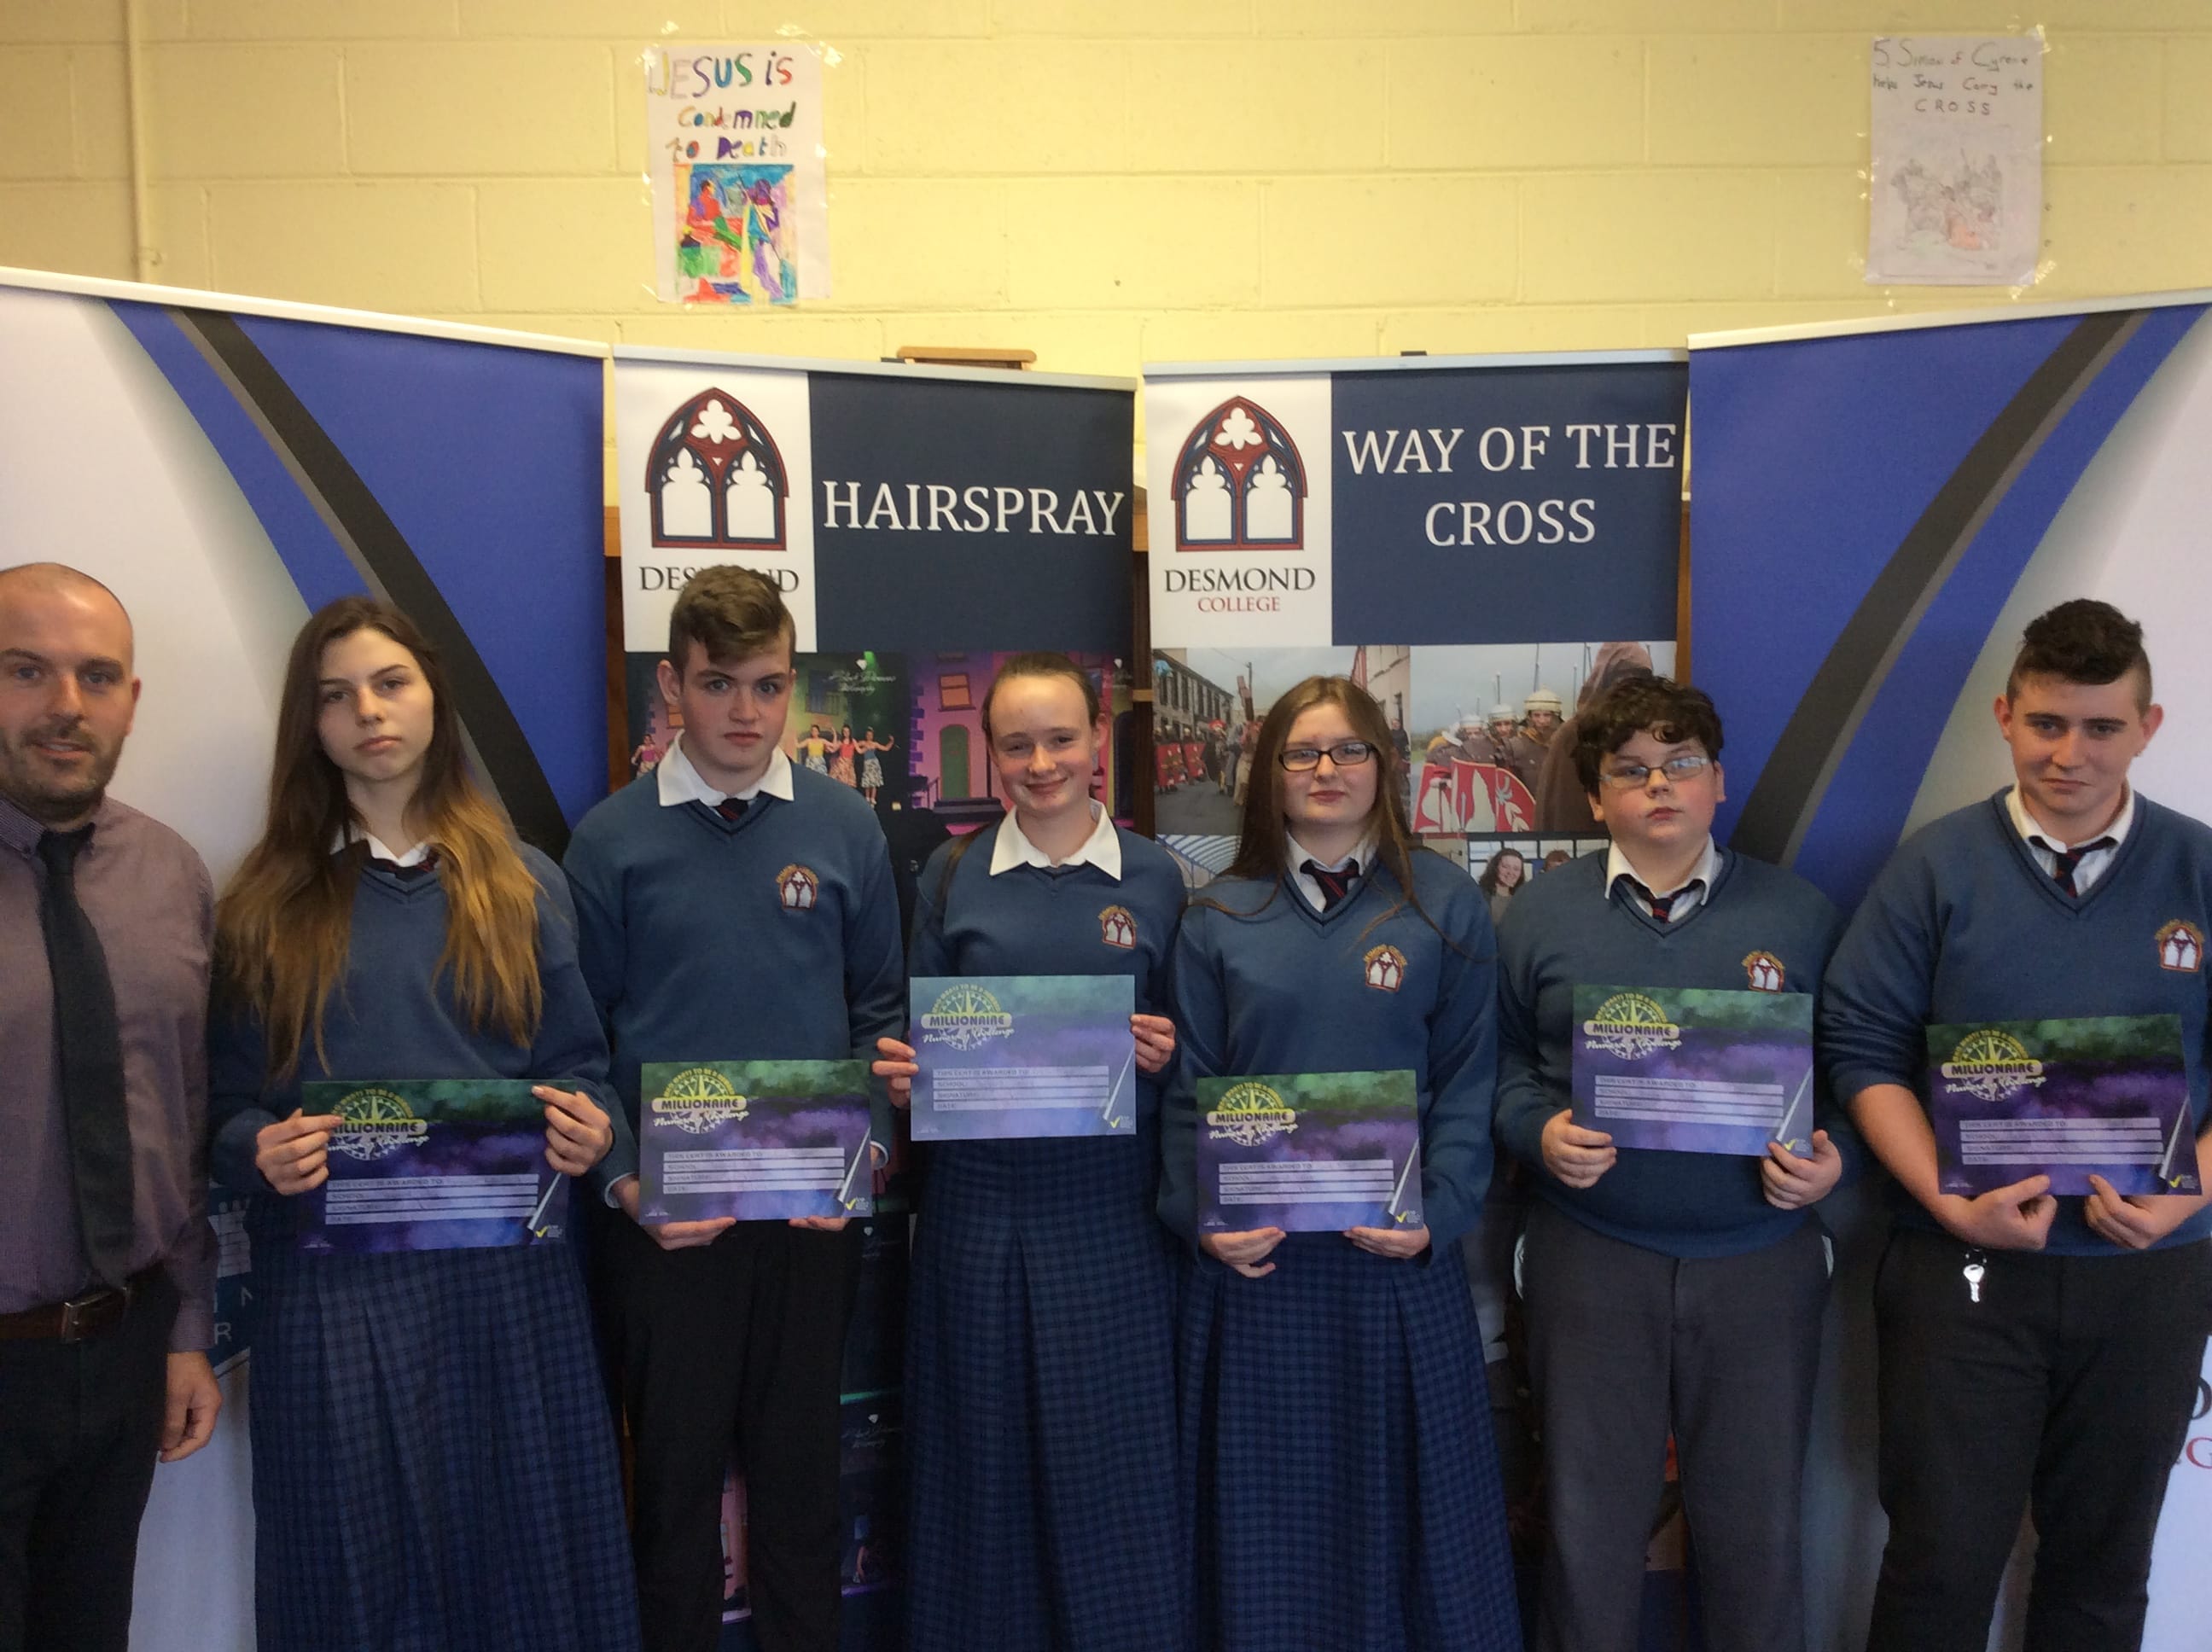 May 2018: Desmond College Student Awards